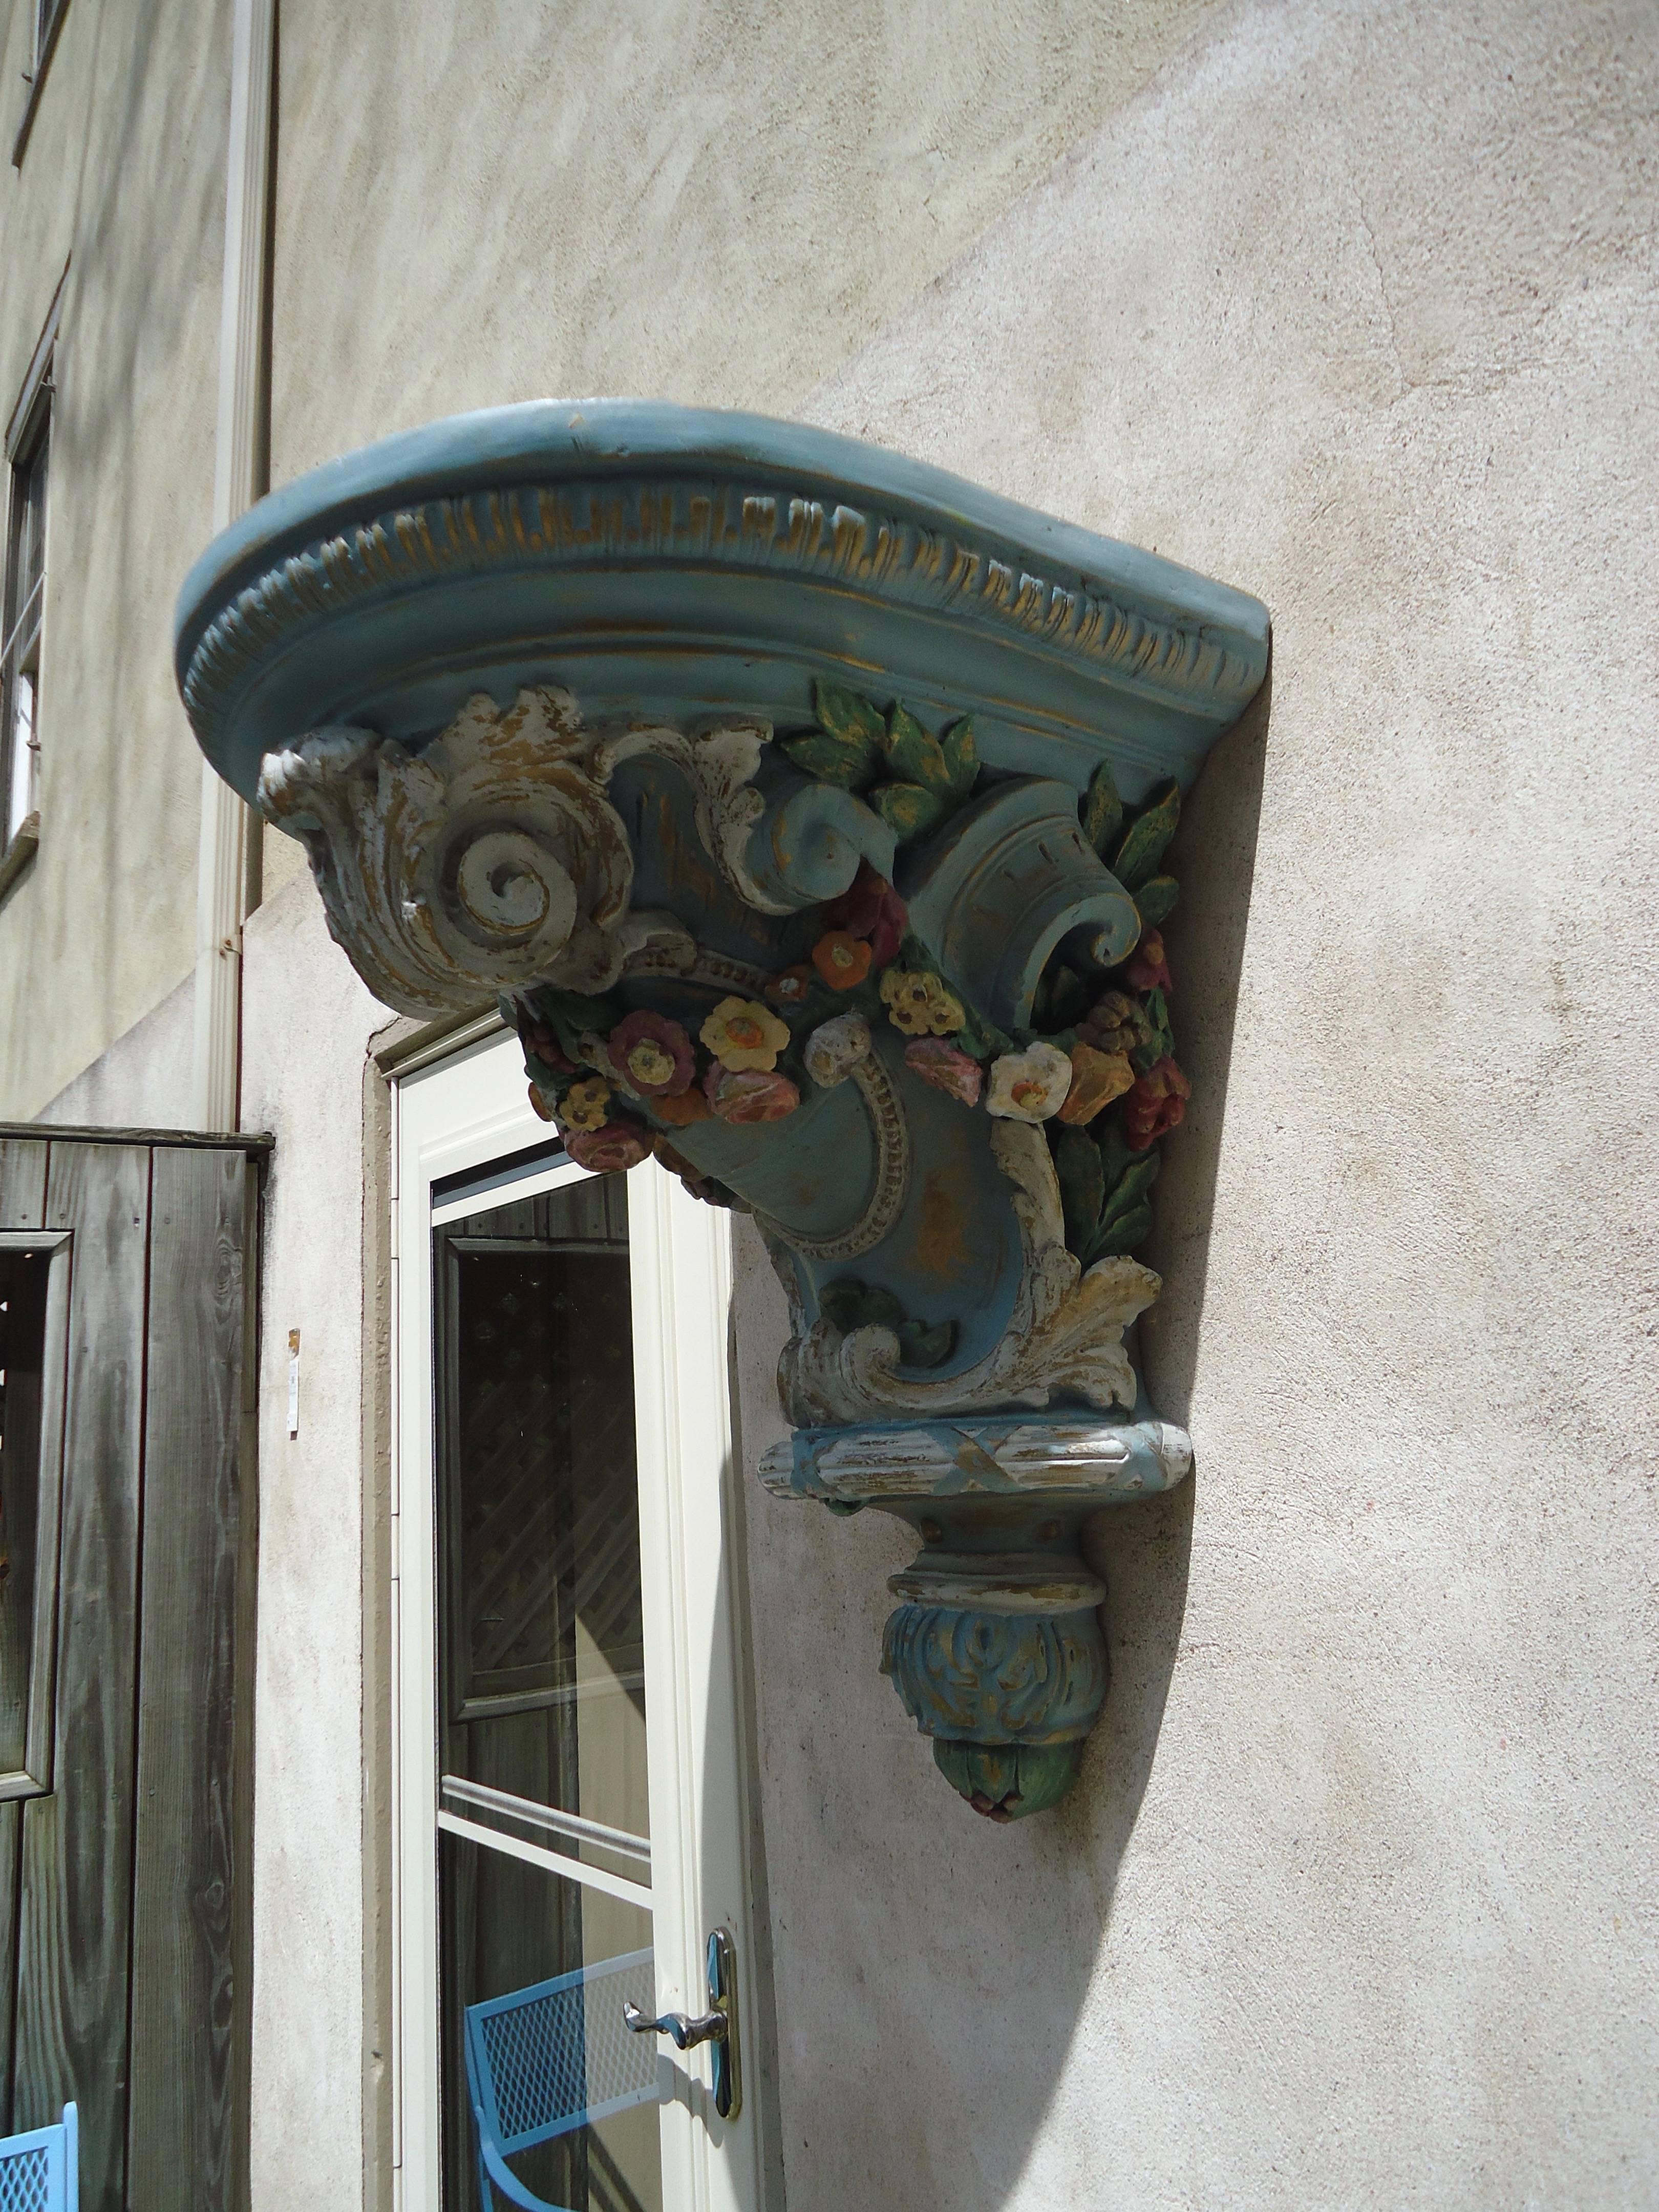 Gorgeous fiberglass resin Swedish corbel with flower garland is hand cast from the original antique bracket, having intricate details and a hand-painted finish. This high quality medium is impervious to weather, durable and maintenance free. Weight